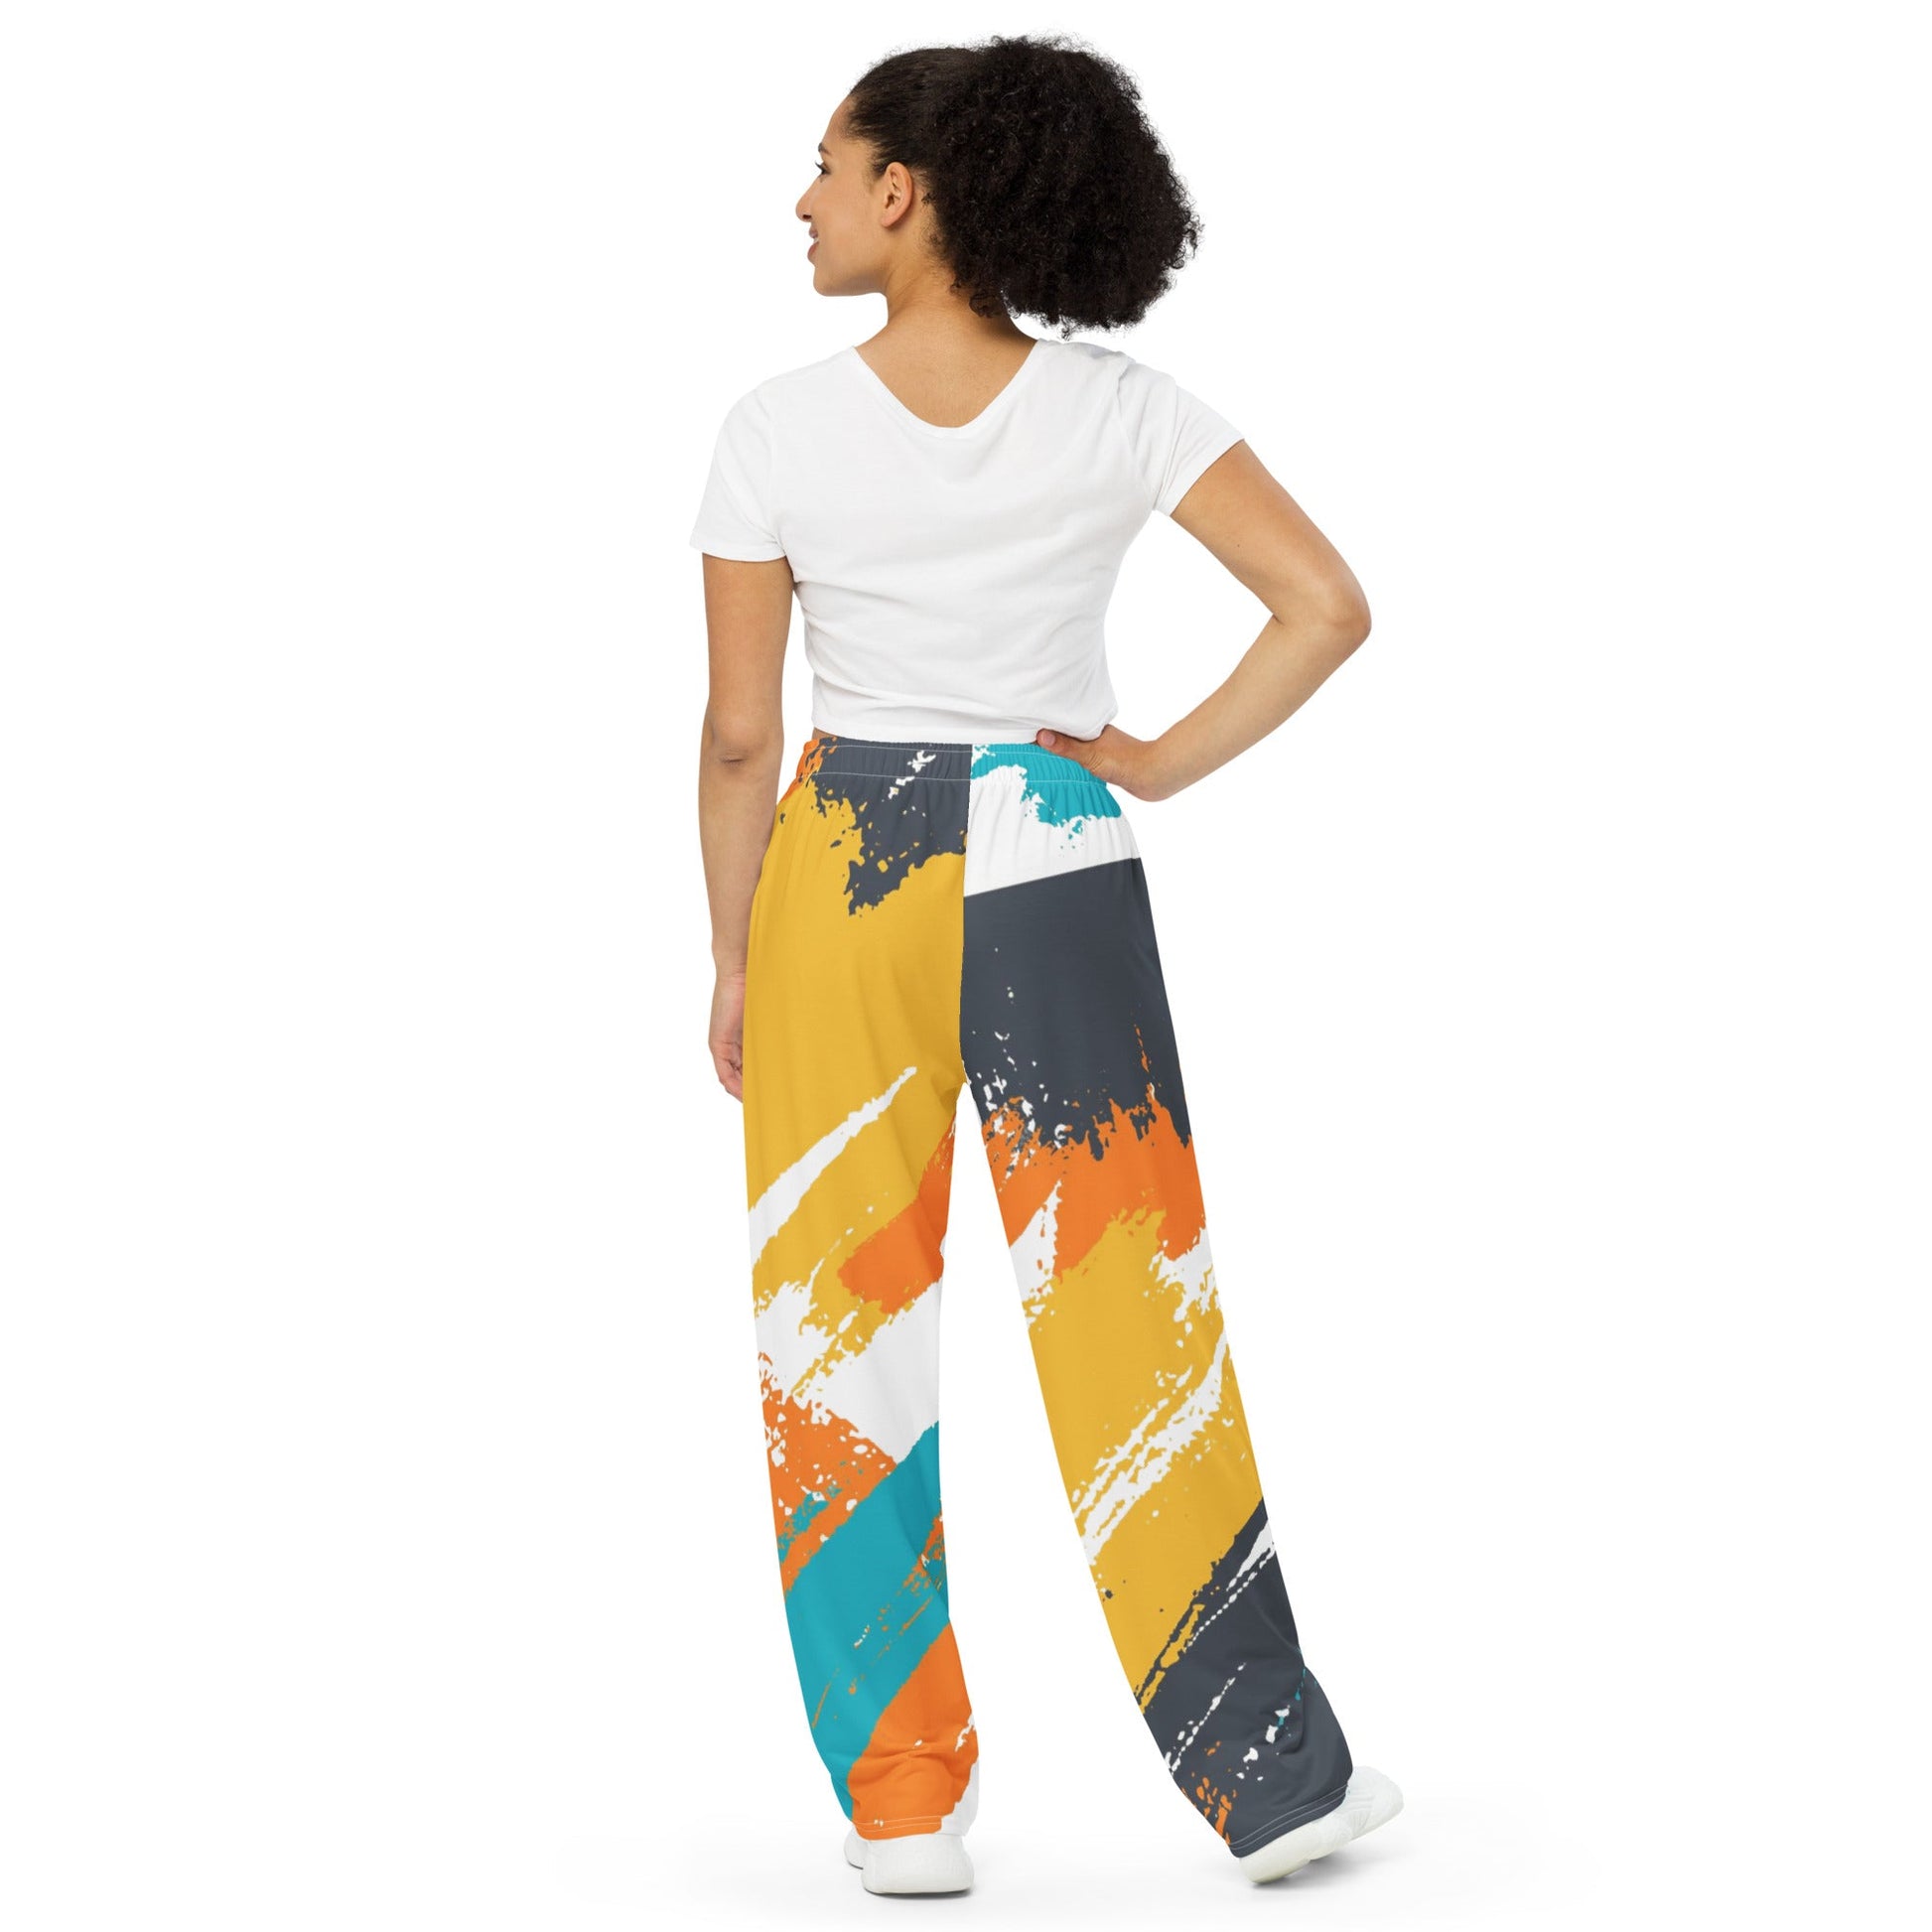 Colorful All-Over Print Unisex Wide-Leg Pants - Comfort and Fashion Combined